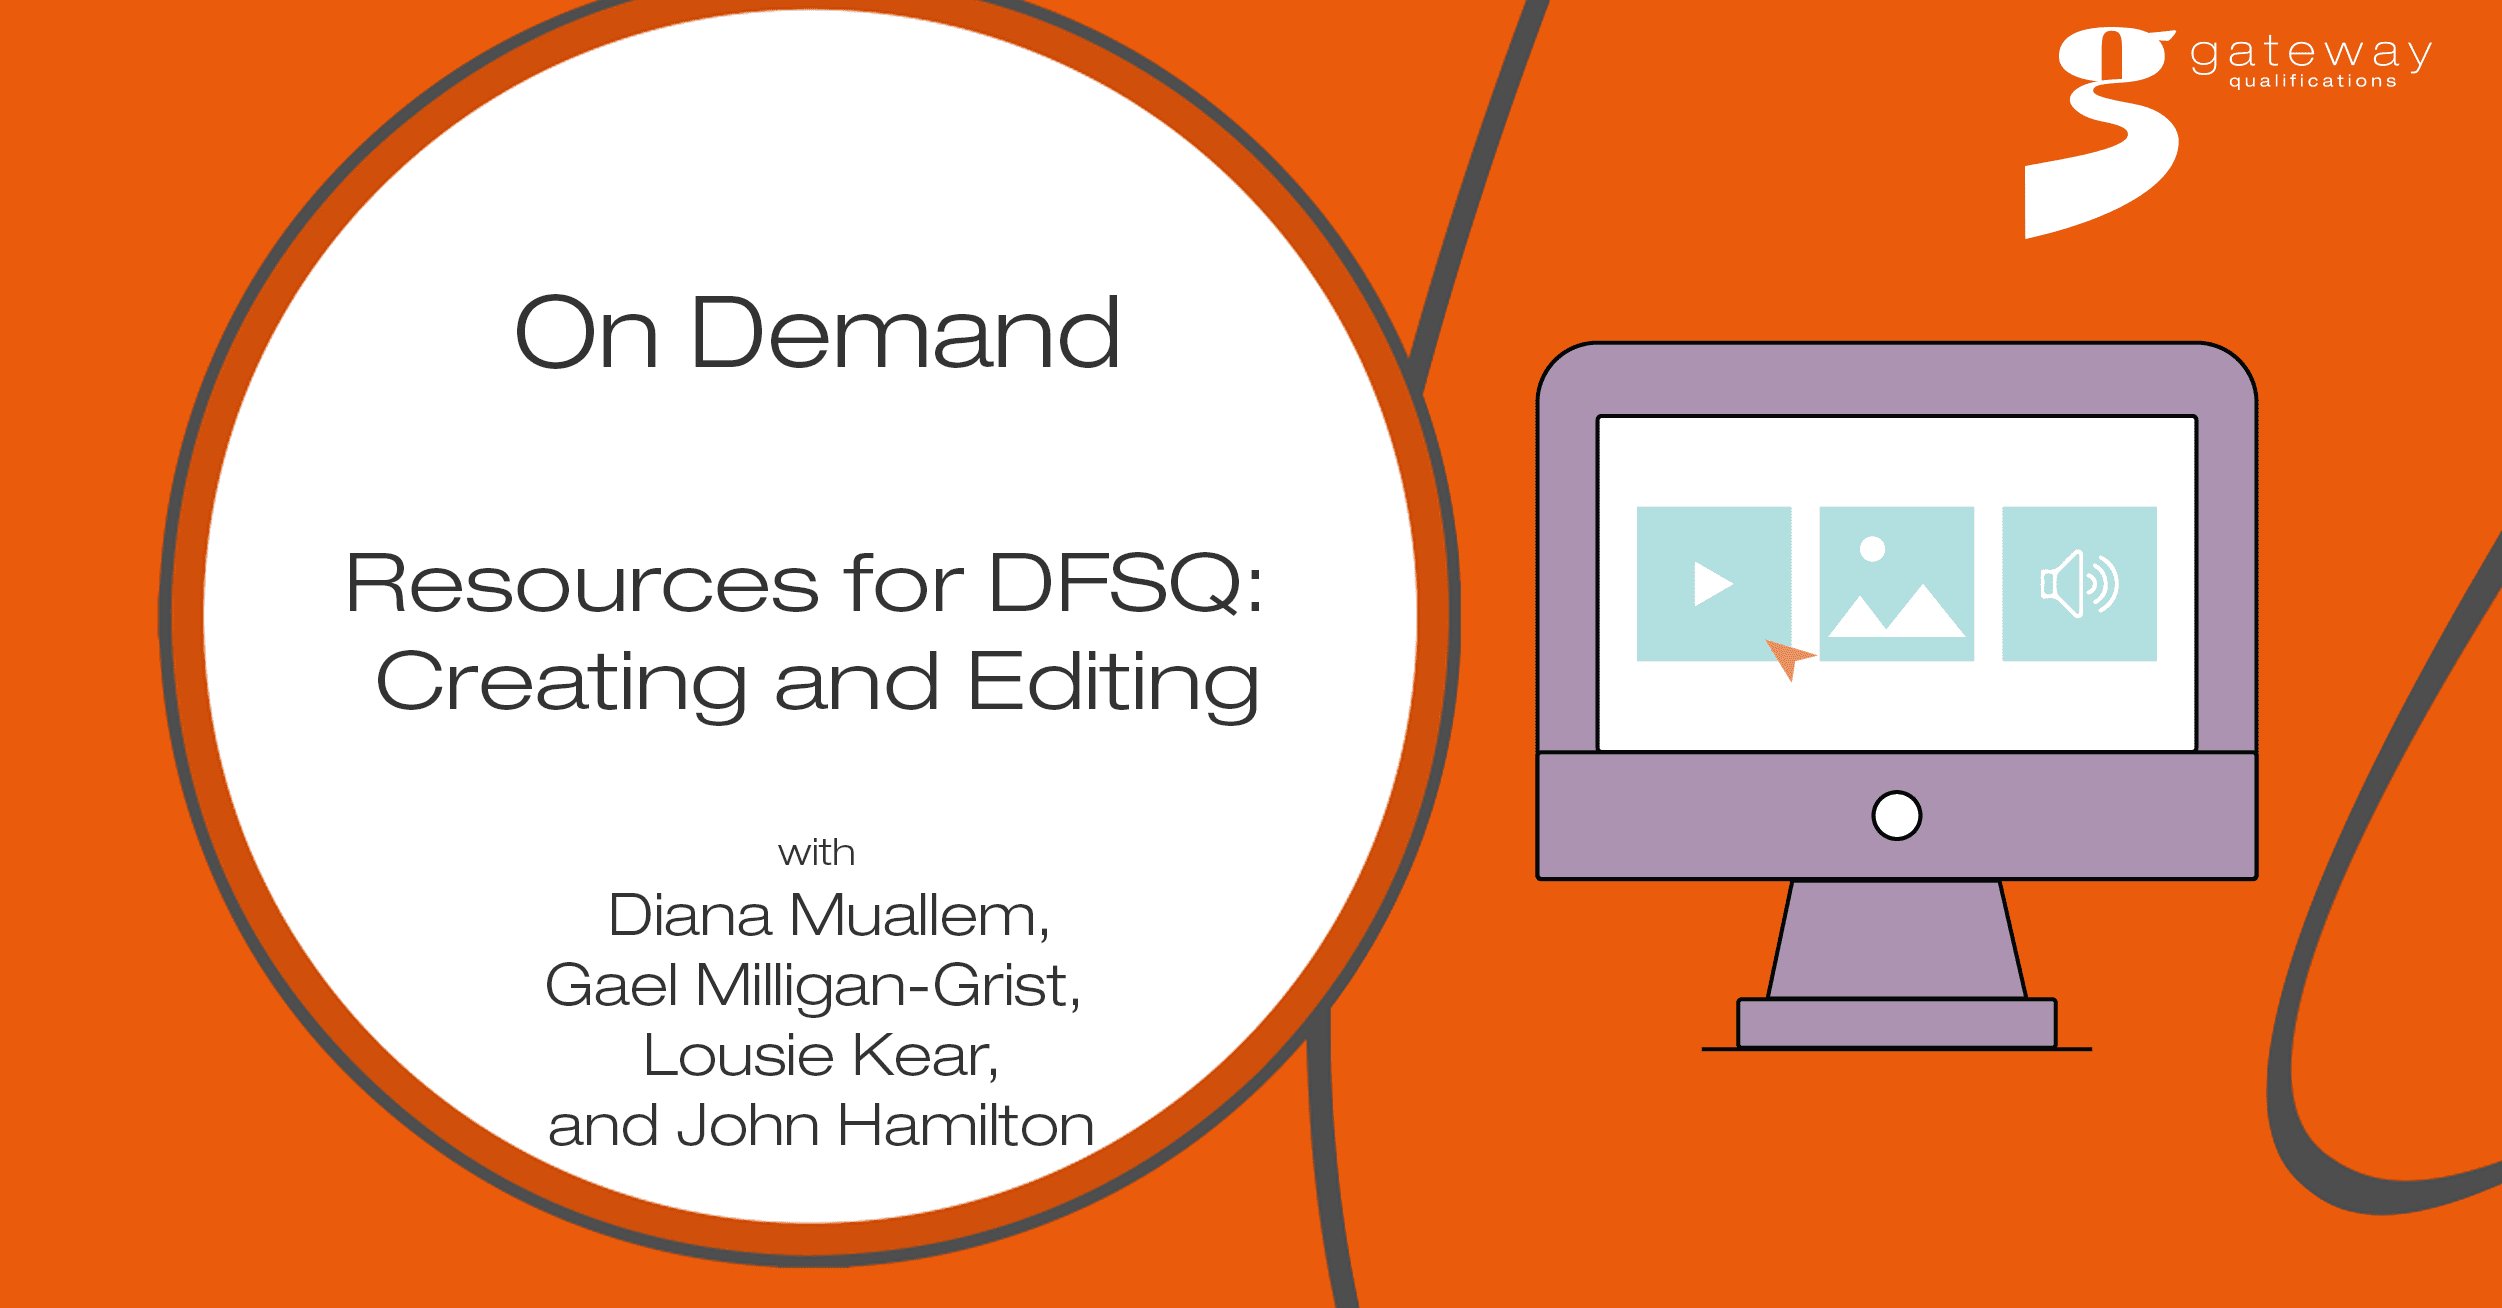 Resources for DFSQ - Creating and Editing_on demand